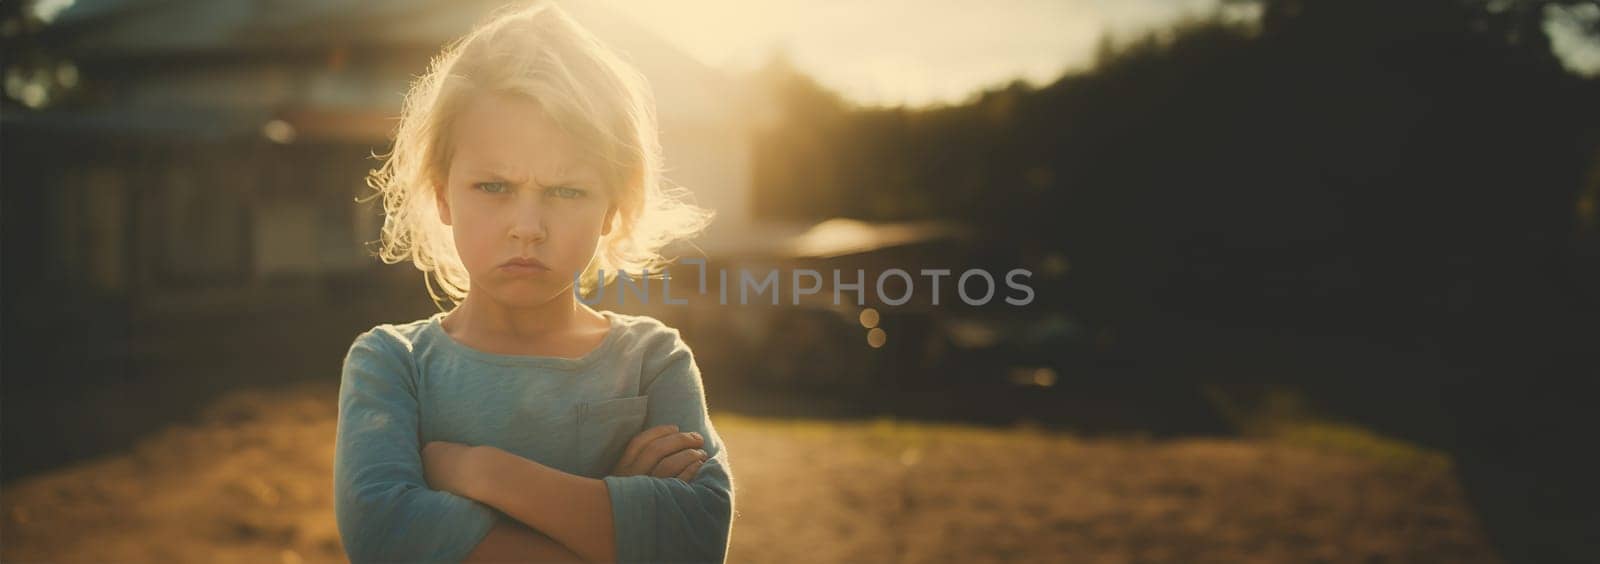 Cute angry child. Attention deficit hyperactivity disorder (ADHD) Concept.Angry boy or girl screaming,upset, sad, negative attitude.Stressed child, Kid with bad behavior stubborn.mental health.Autism kid.Angry child. Copy space by Annebel146